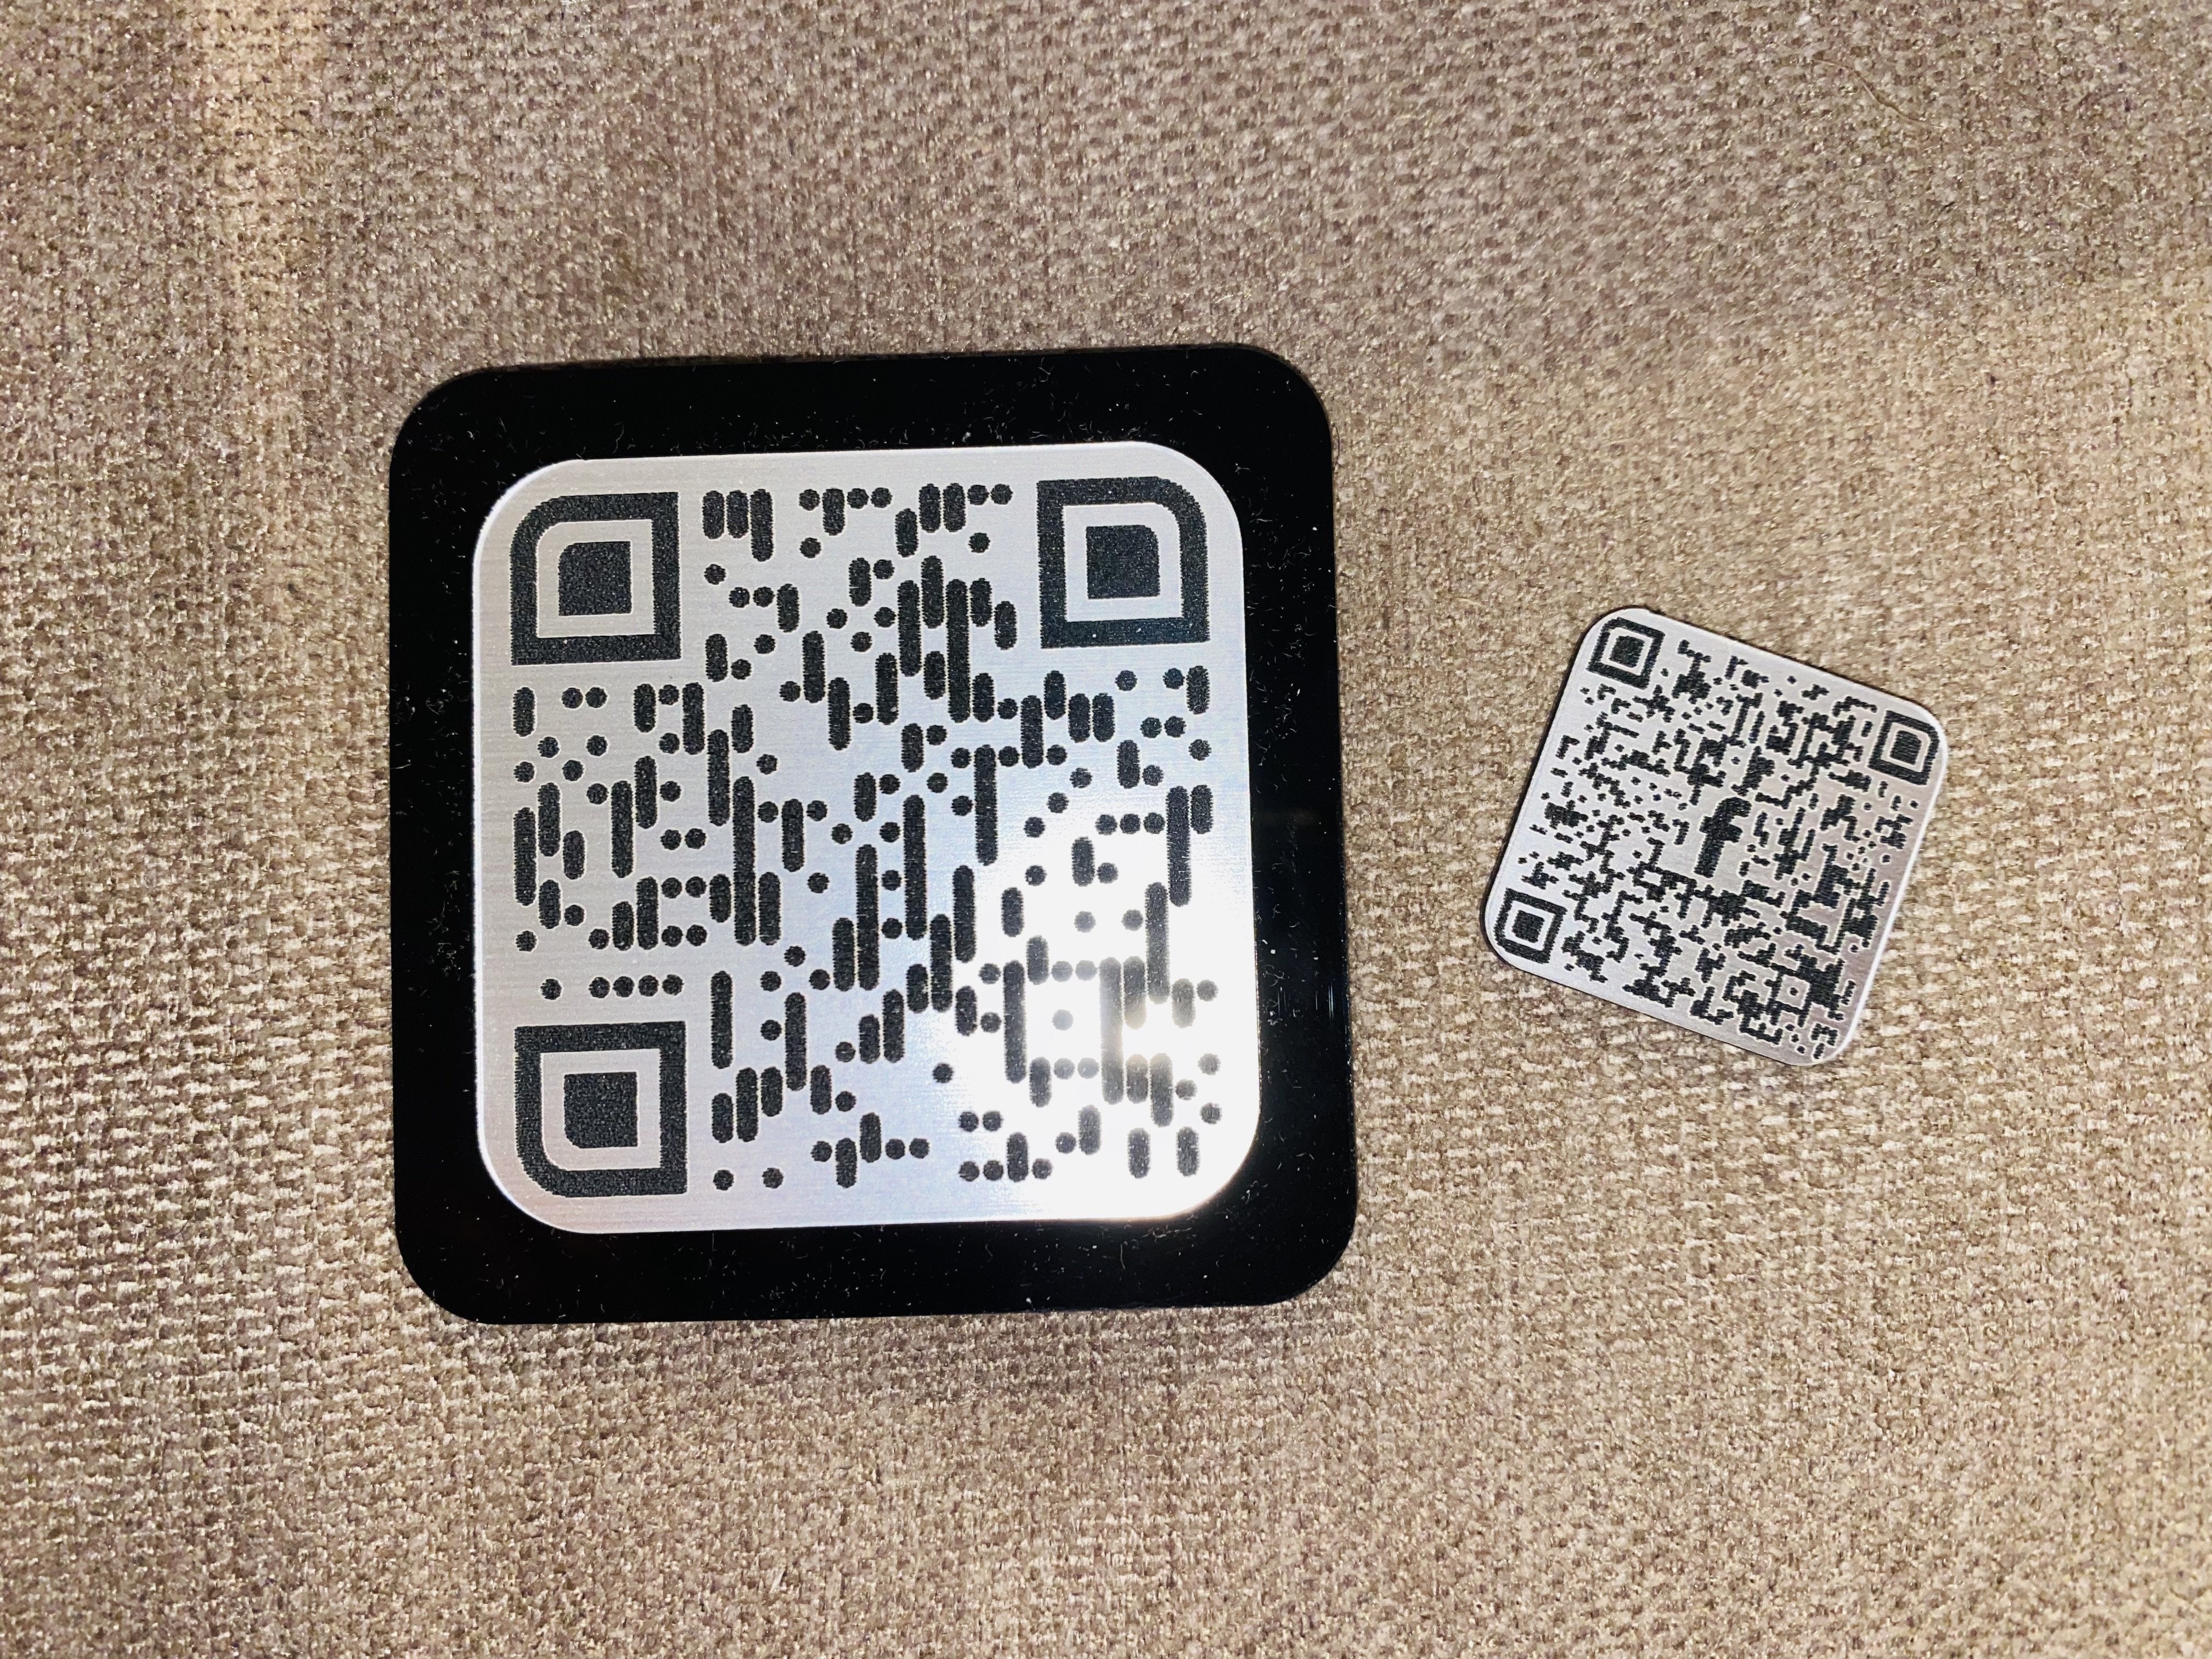 QR Code with NFC - Lay Flat